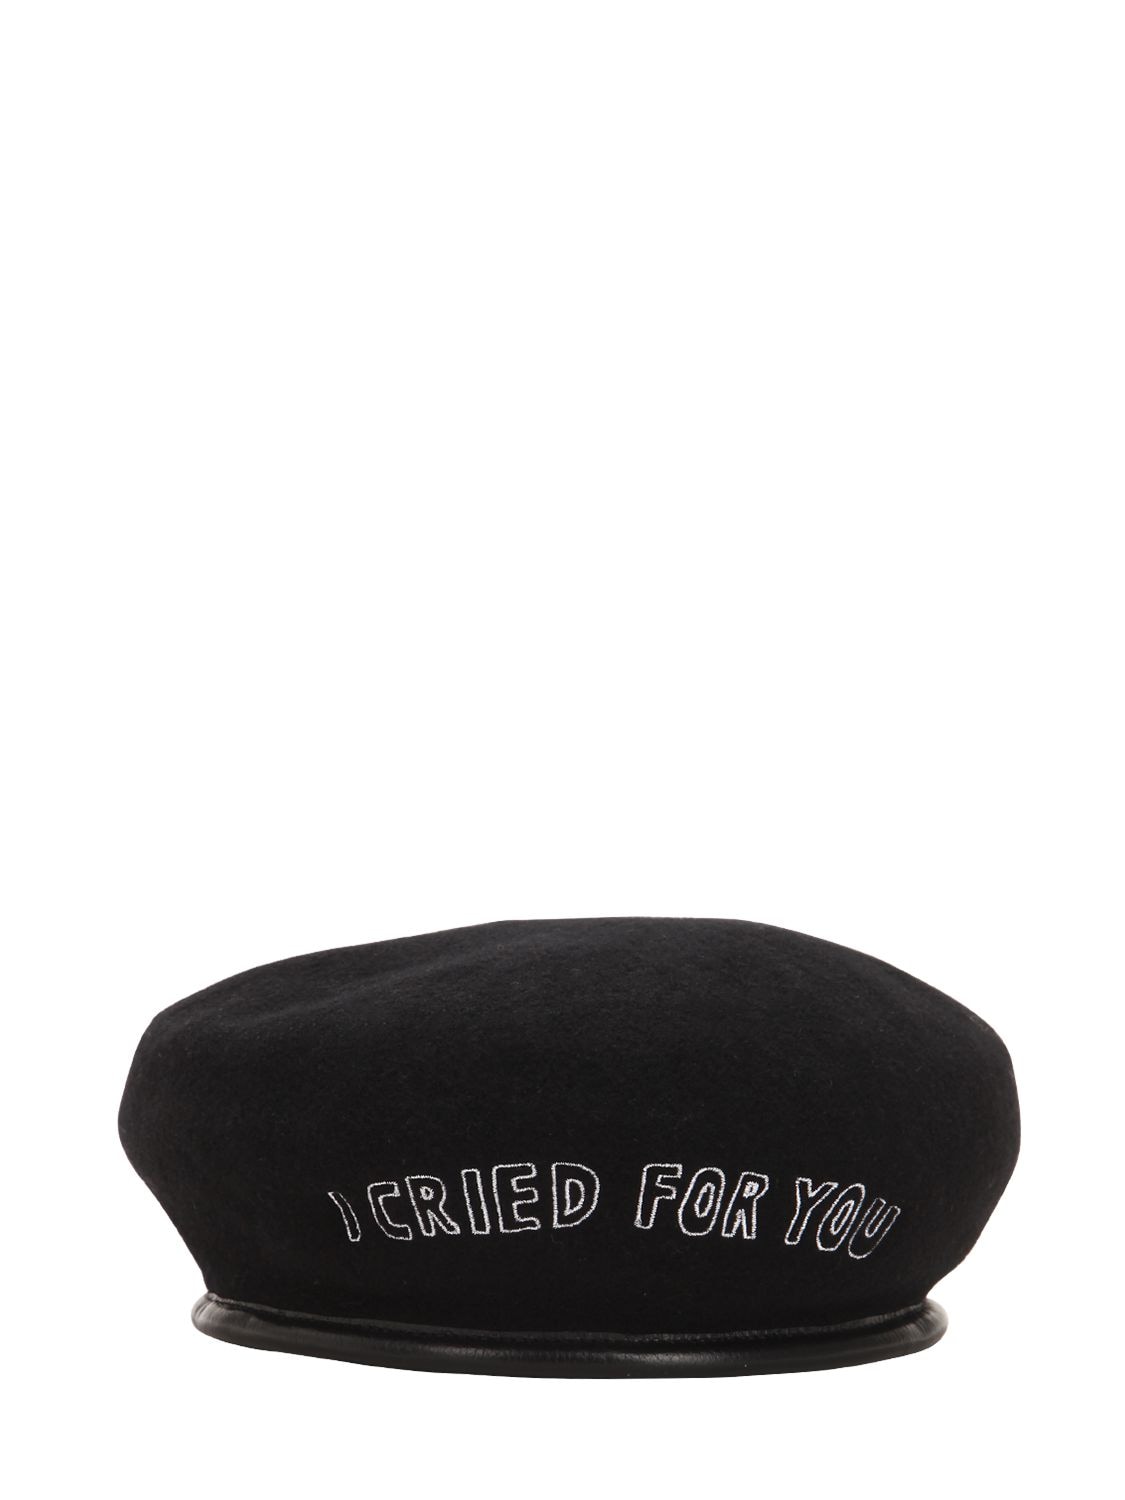 AZS TOKYO I CRIED FOR YOU DISTRESSED BERET,68IWKS015-QKXBQ0S1